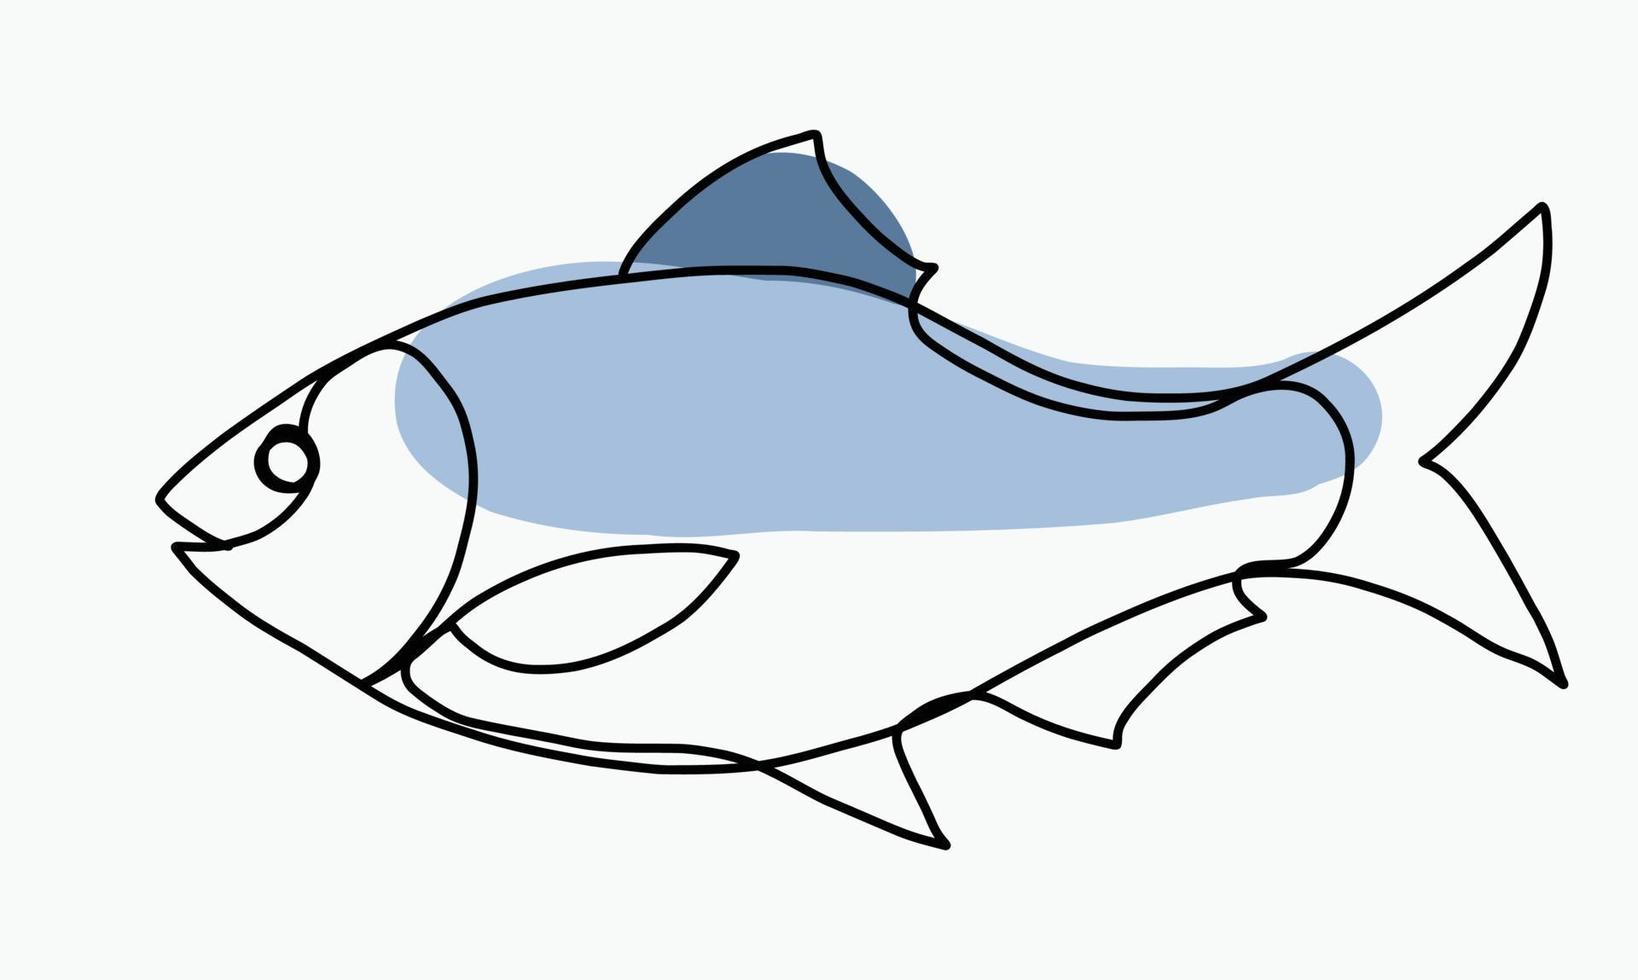 Doodle freehand sketch continuous drawing of fish. vector